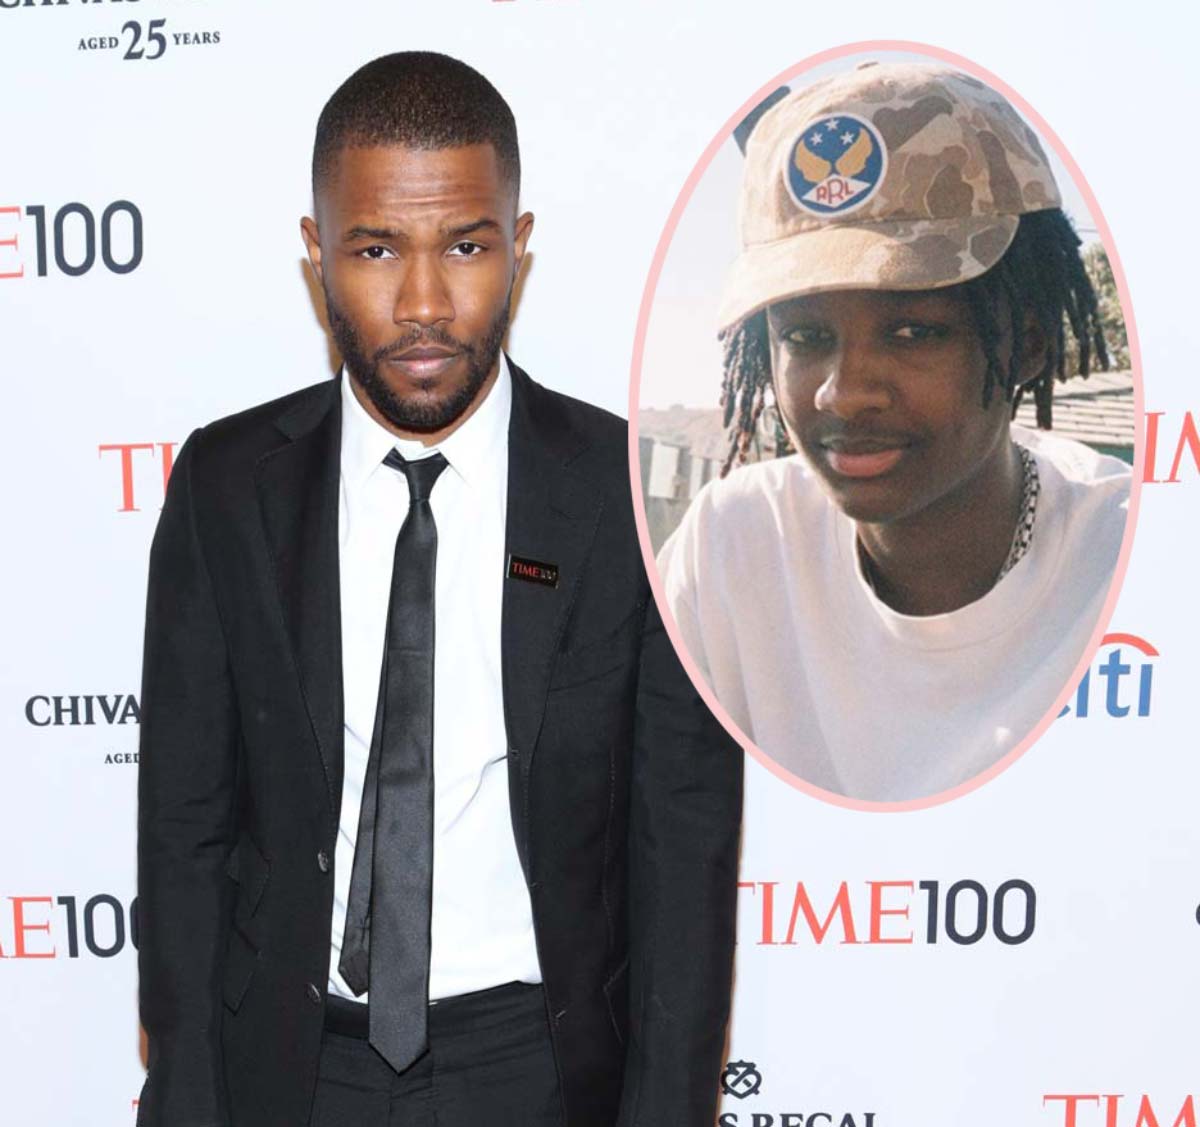 Frank Ocean's Brother Ryan Breaux Reportedly Dead At 18 Following Car